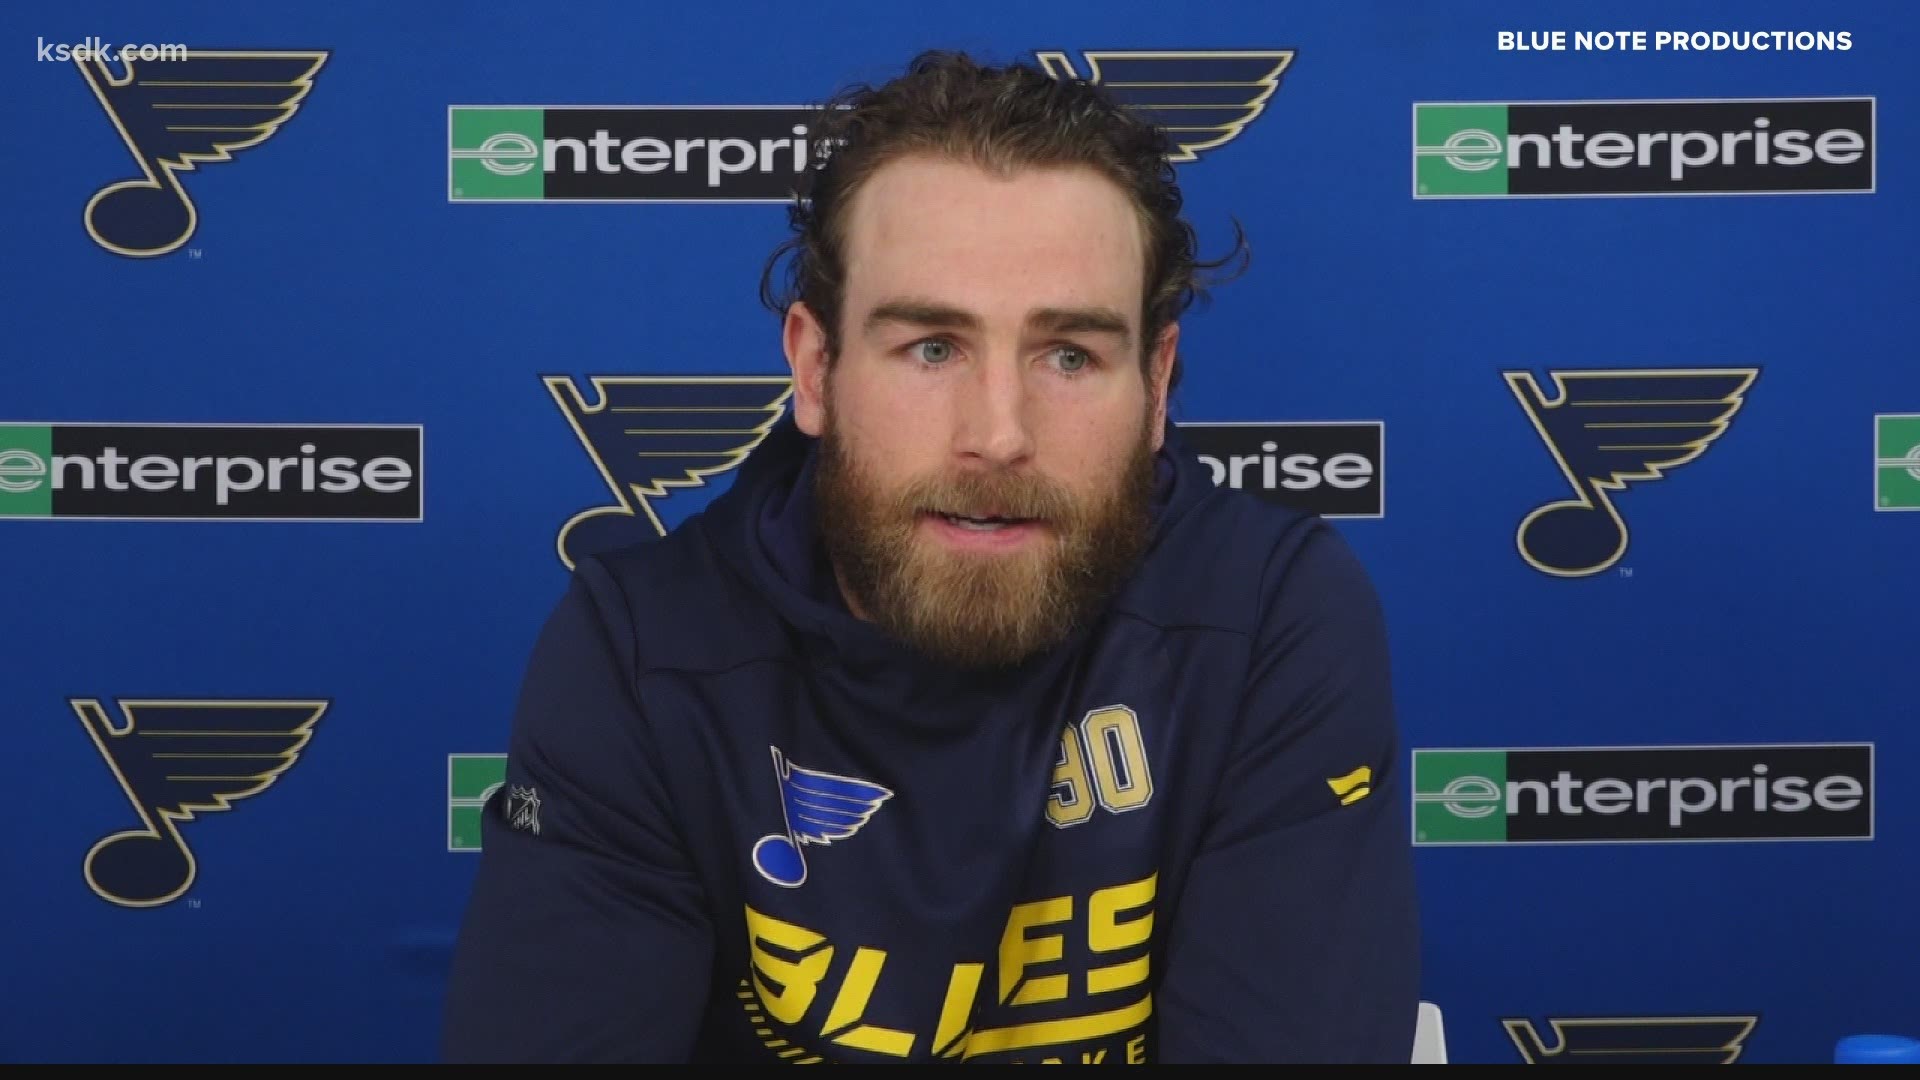 Alex Pietrangelo had held that title for the past four seasons